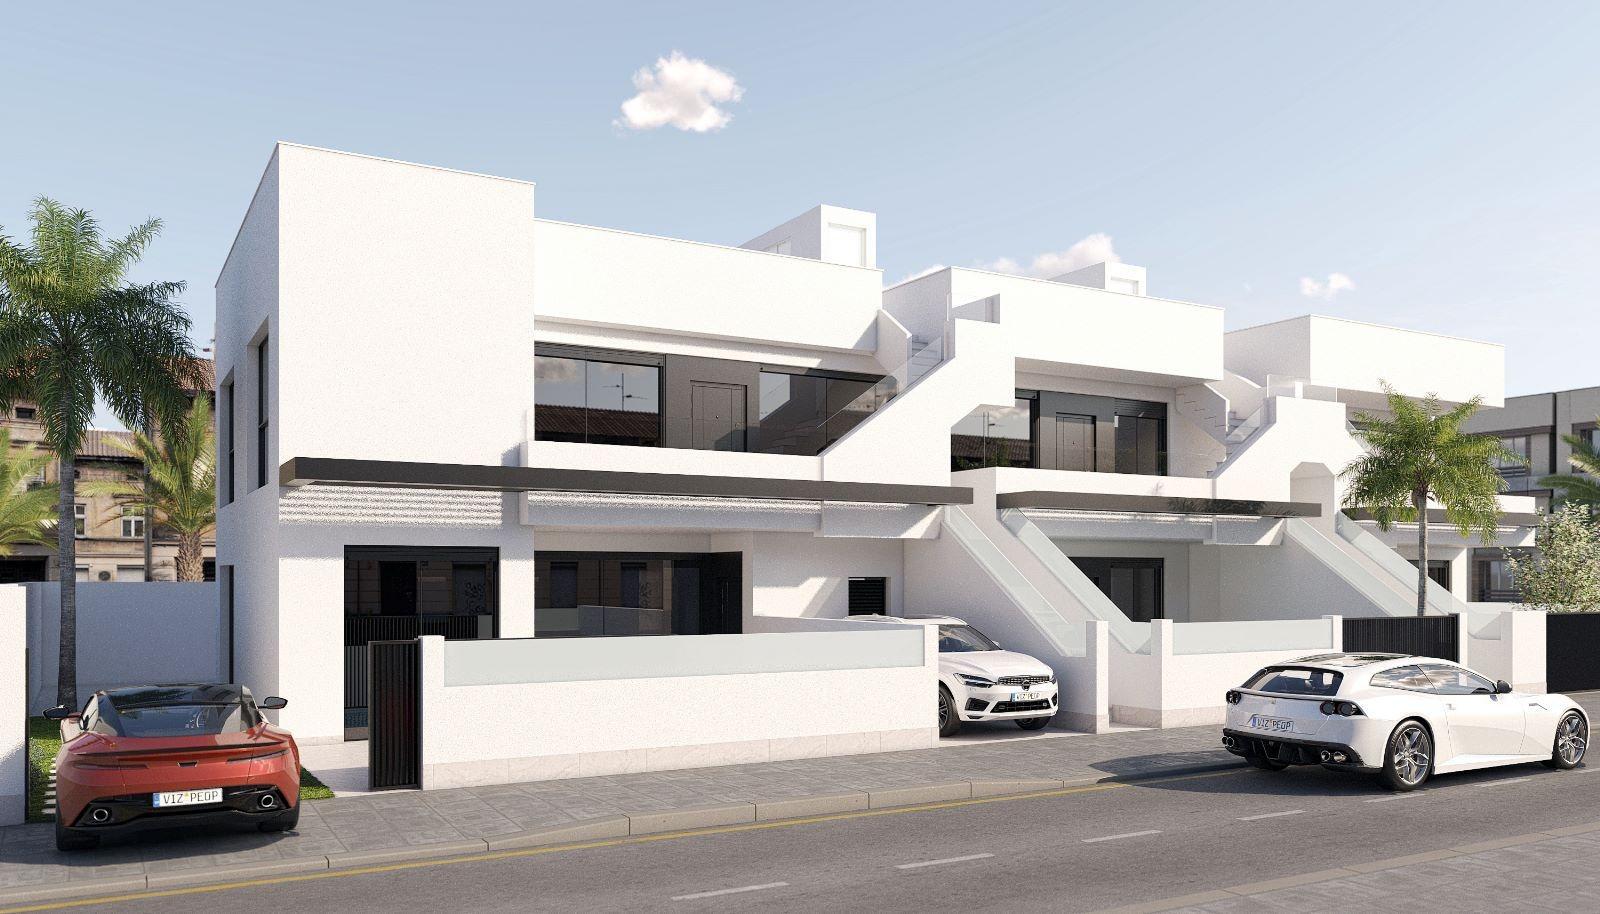 NEW BUILD BUNGALOWS IN SAN JAVIER

New Build project with only 6 bungalow apartments, 3 ground floor and 3 top floor apartments, all them with a private pool in San Javier, less than 100m from the beach!

Modern New Build bungalows with 3 bedrooms and 2 bathrooms, open plan kitchen with spacious living room, fitted wardrobes, terrace, private parking space.
The ground floor properties will have a back and a front garden with pool and the top floor properties will have a solarium with pool.

San Javier is close to all amenities with easy access to the beach, water sports, shops and the transport network.

Here you can enjoy all of the facilities that San Javier has to offer such as the local shops, bars and restaurants as well as being near to shopping centres, the airport of Murcia and all of the beautiful places to be found along the Mar Menor.

Corvera/Murcia airport is 30 minutes away and Alicante airport is 45 minutes away.